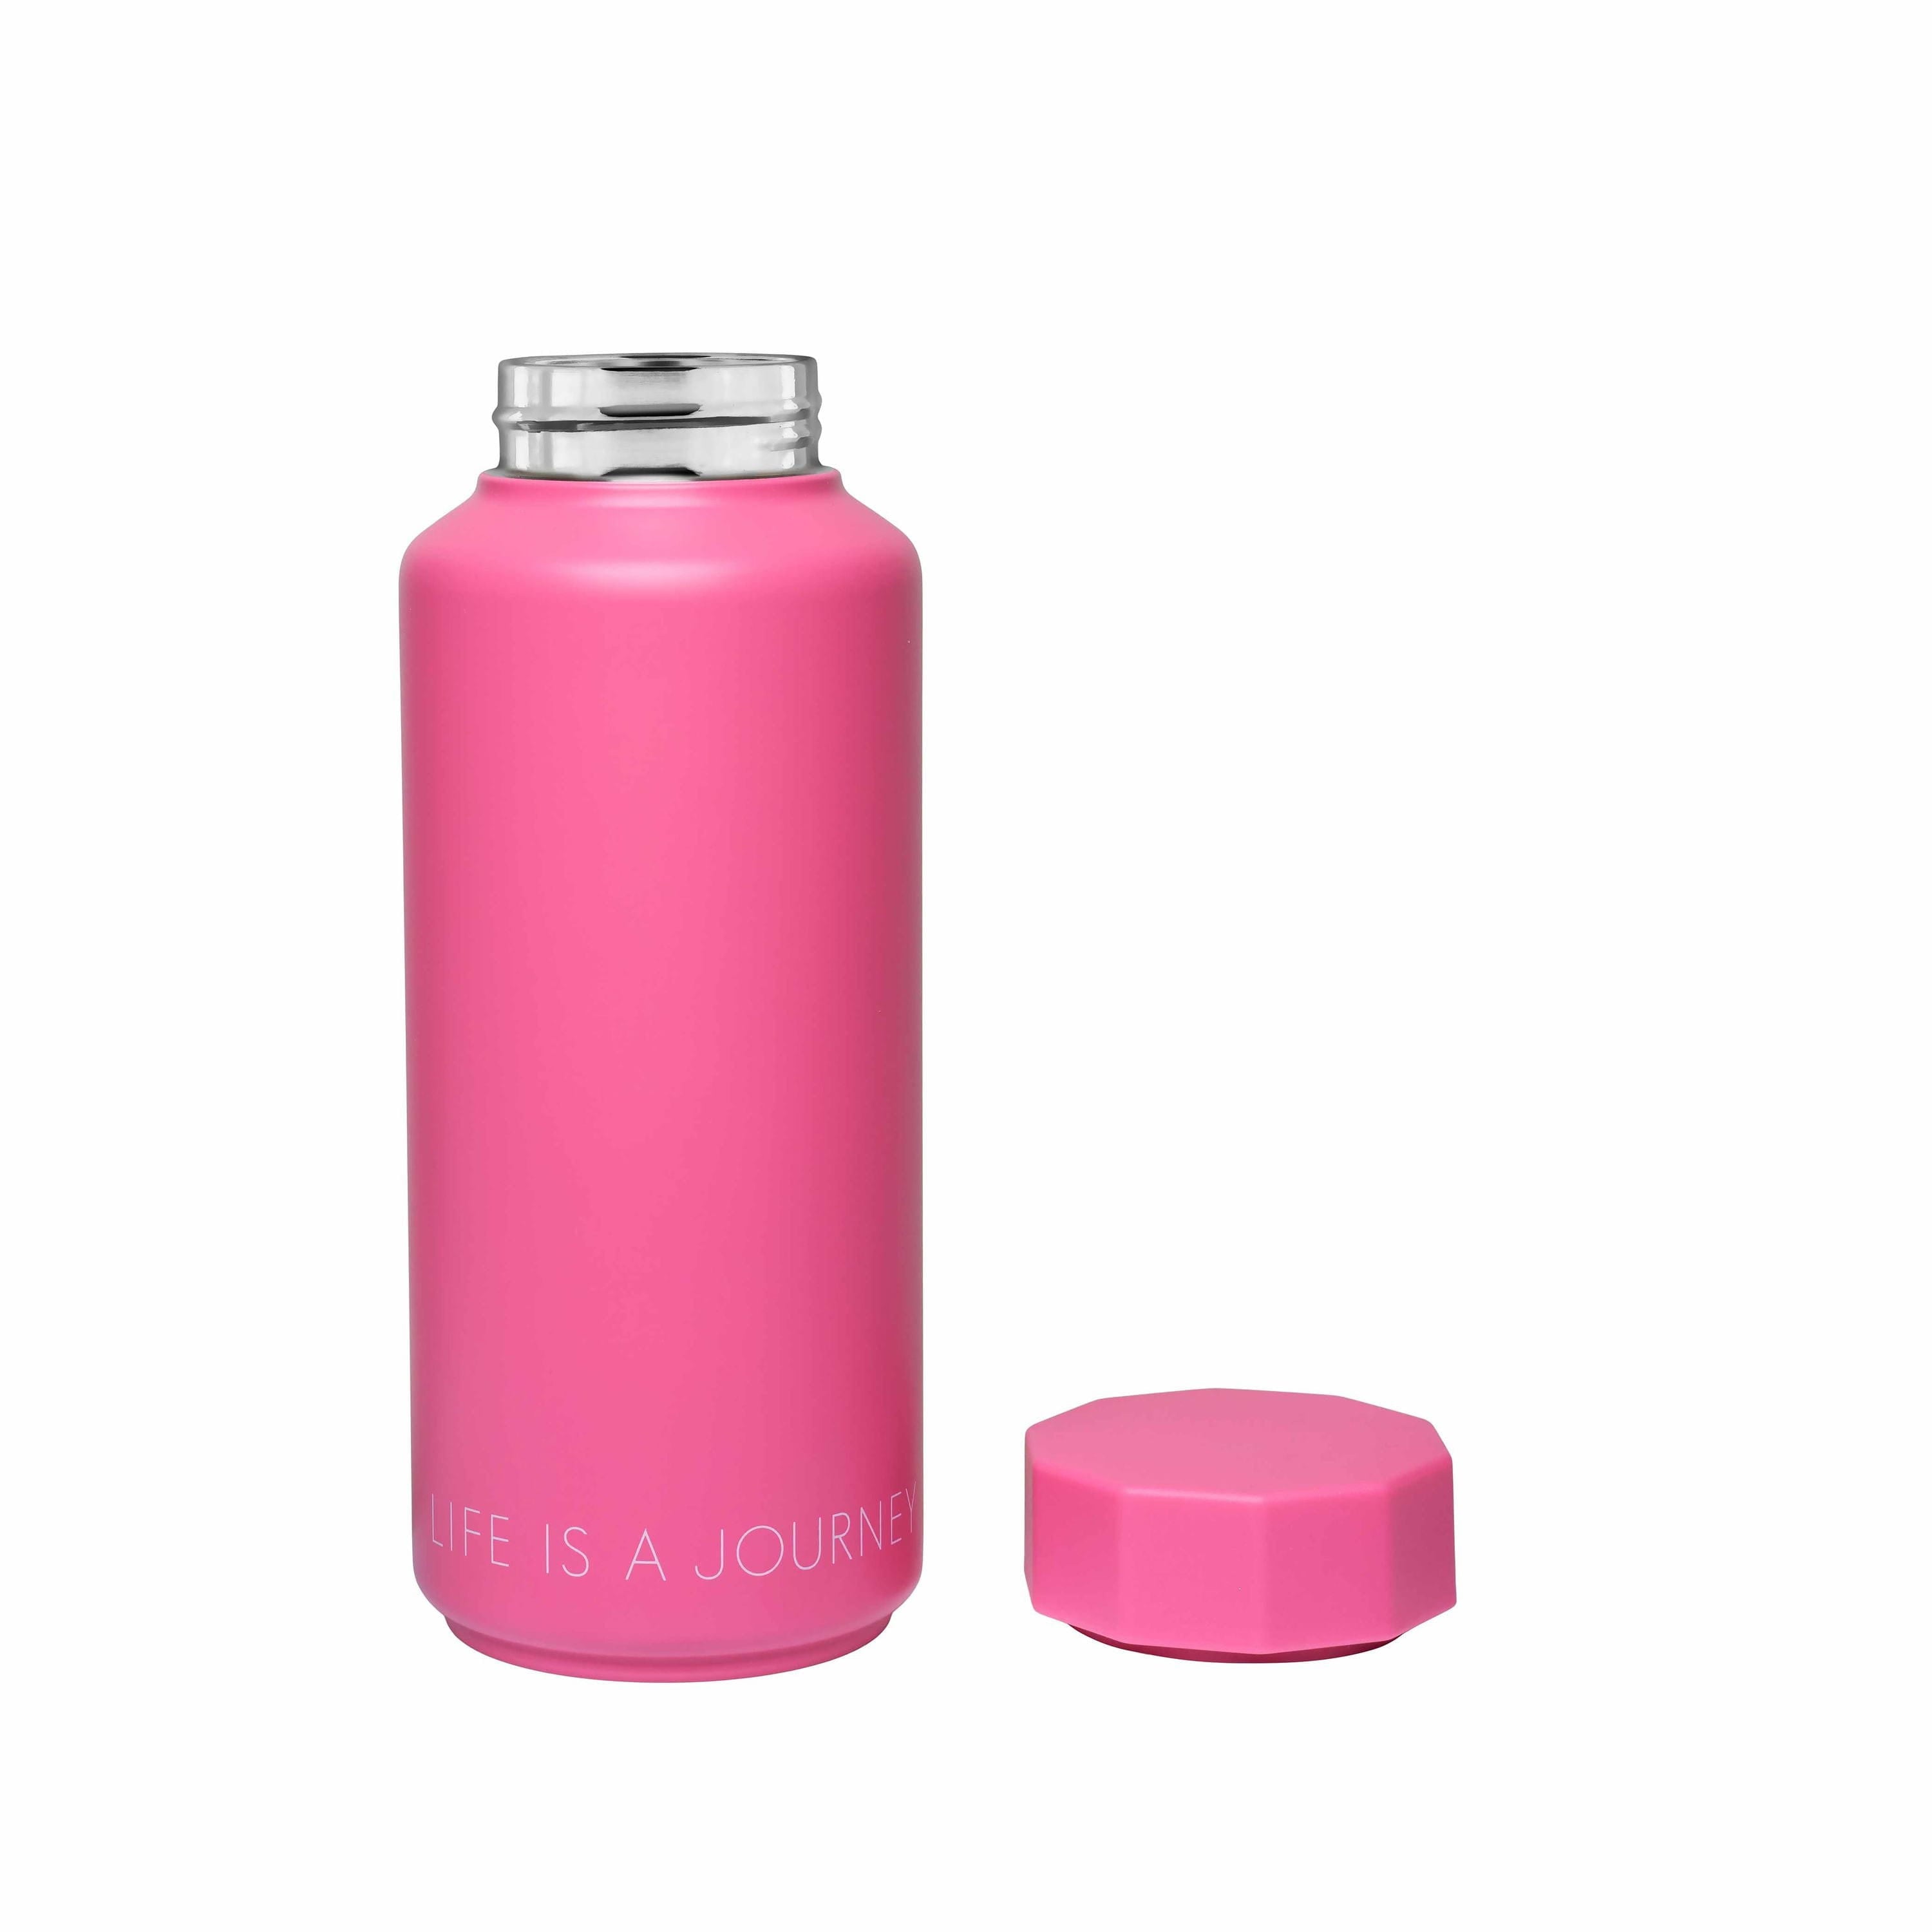 Design Letters Thermos Special Edition Life ist eine Reise, Pink